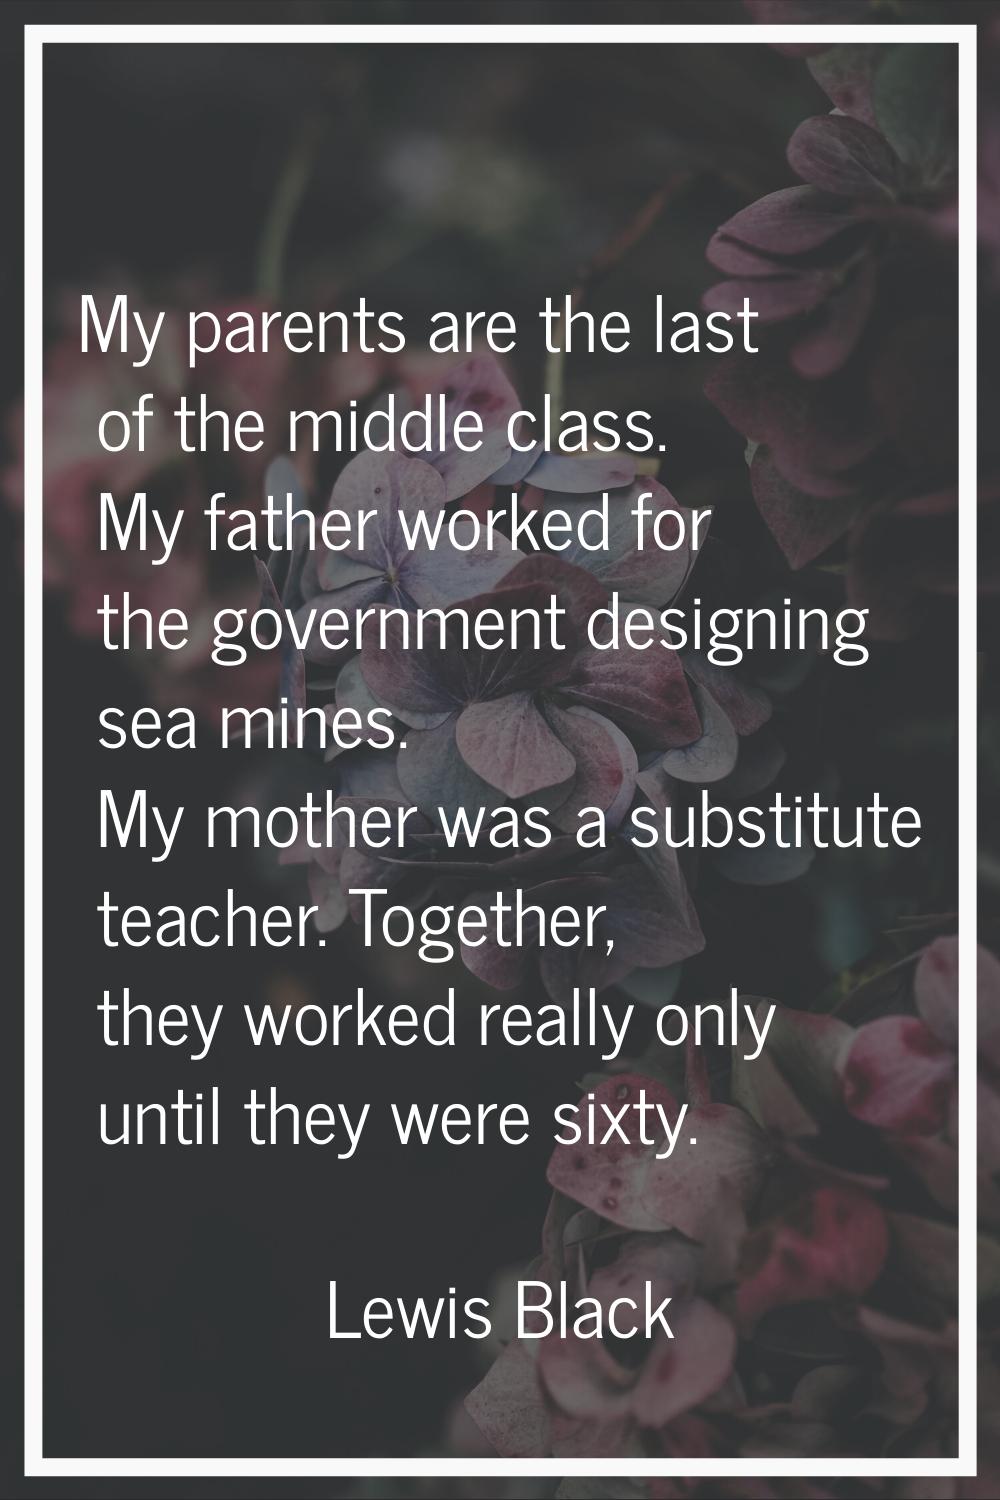 My parents are the last of the middle class. My father worked for the government designing sea mine